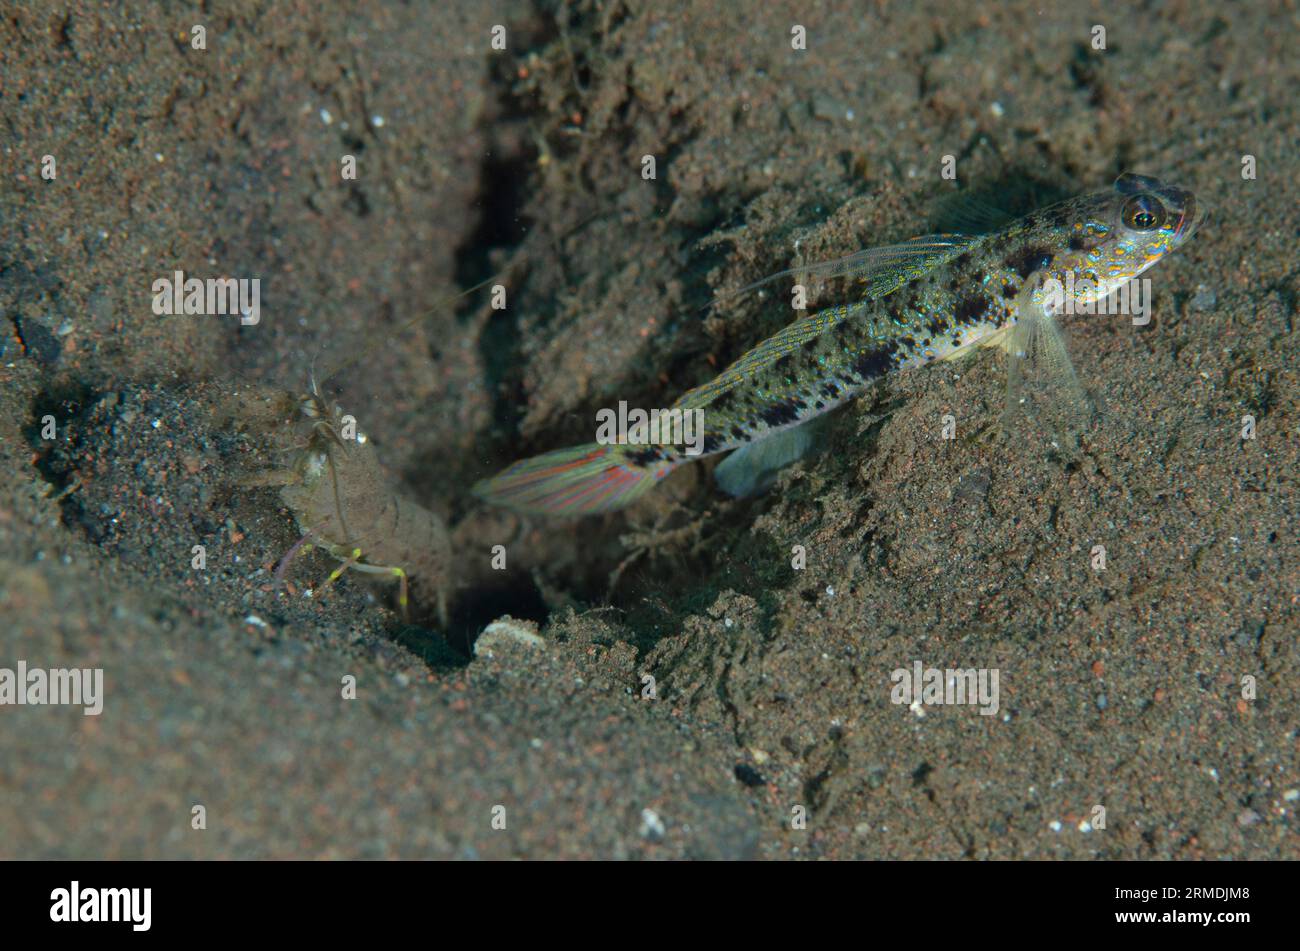 Yellowfoot Shrimpgoby, Valenciennea phaeosticta, with Snapping Shrimp, Alpheus sp, by hole in sand, Pong Pong dive site, Seraya, Karangasem, Bali, Ind Stock Photo